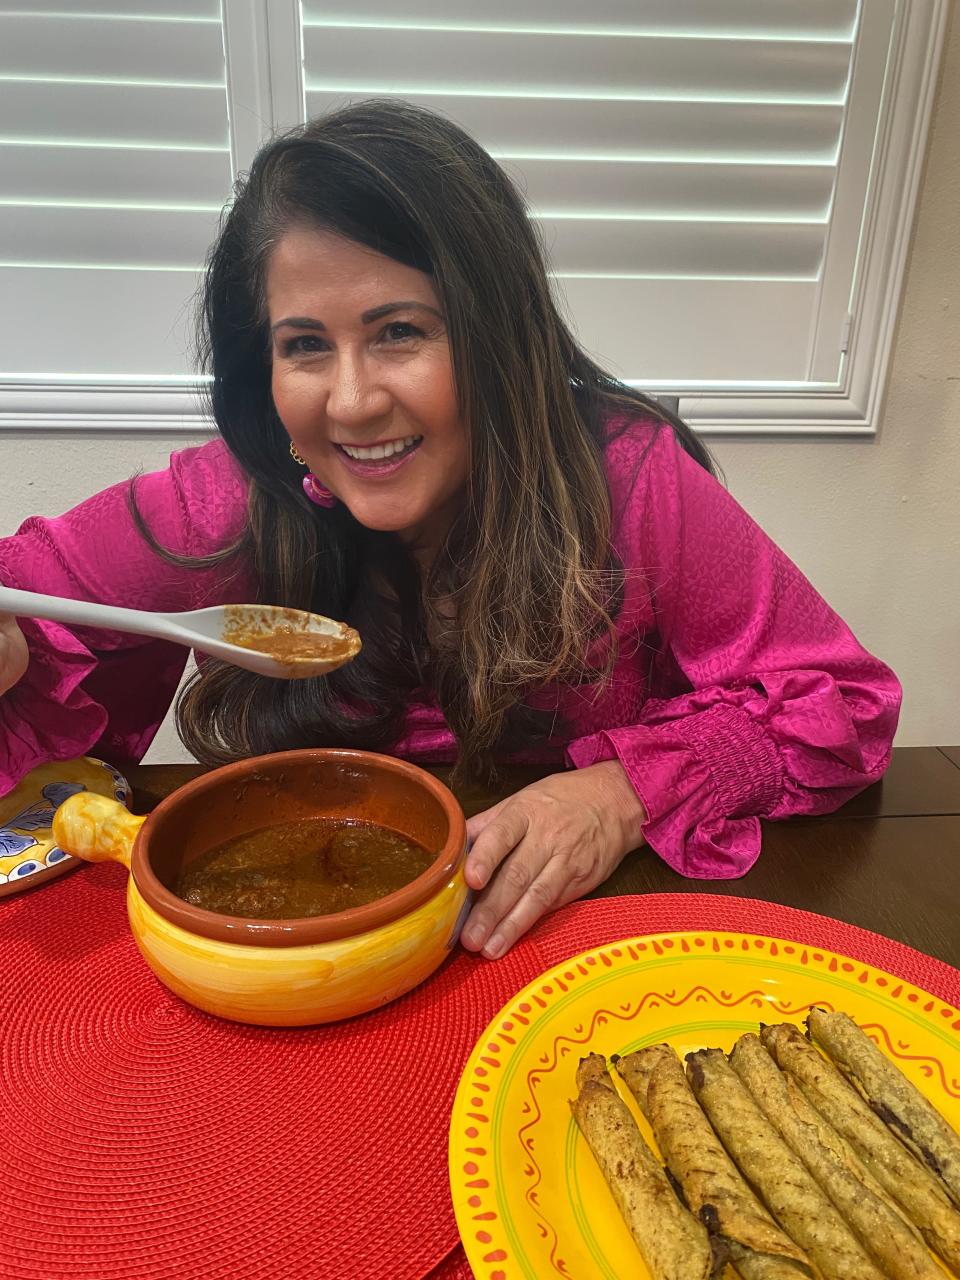 Melissa's mama trying birria from a traditional Mexican pot.